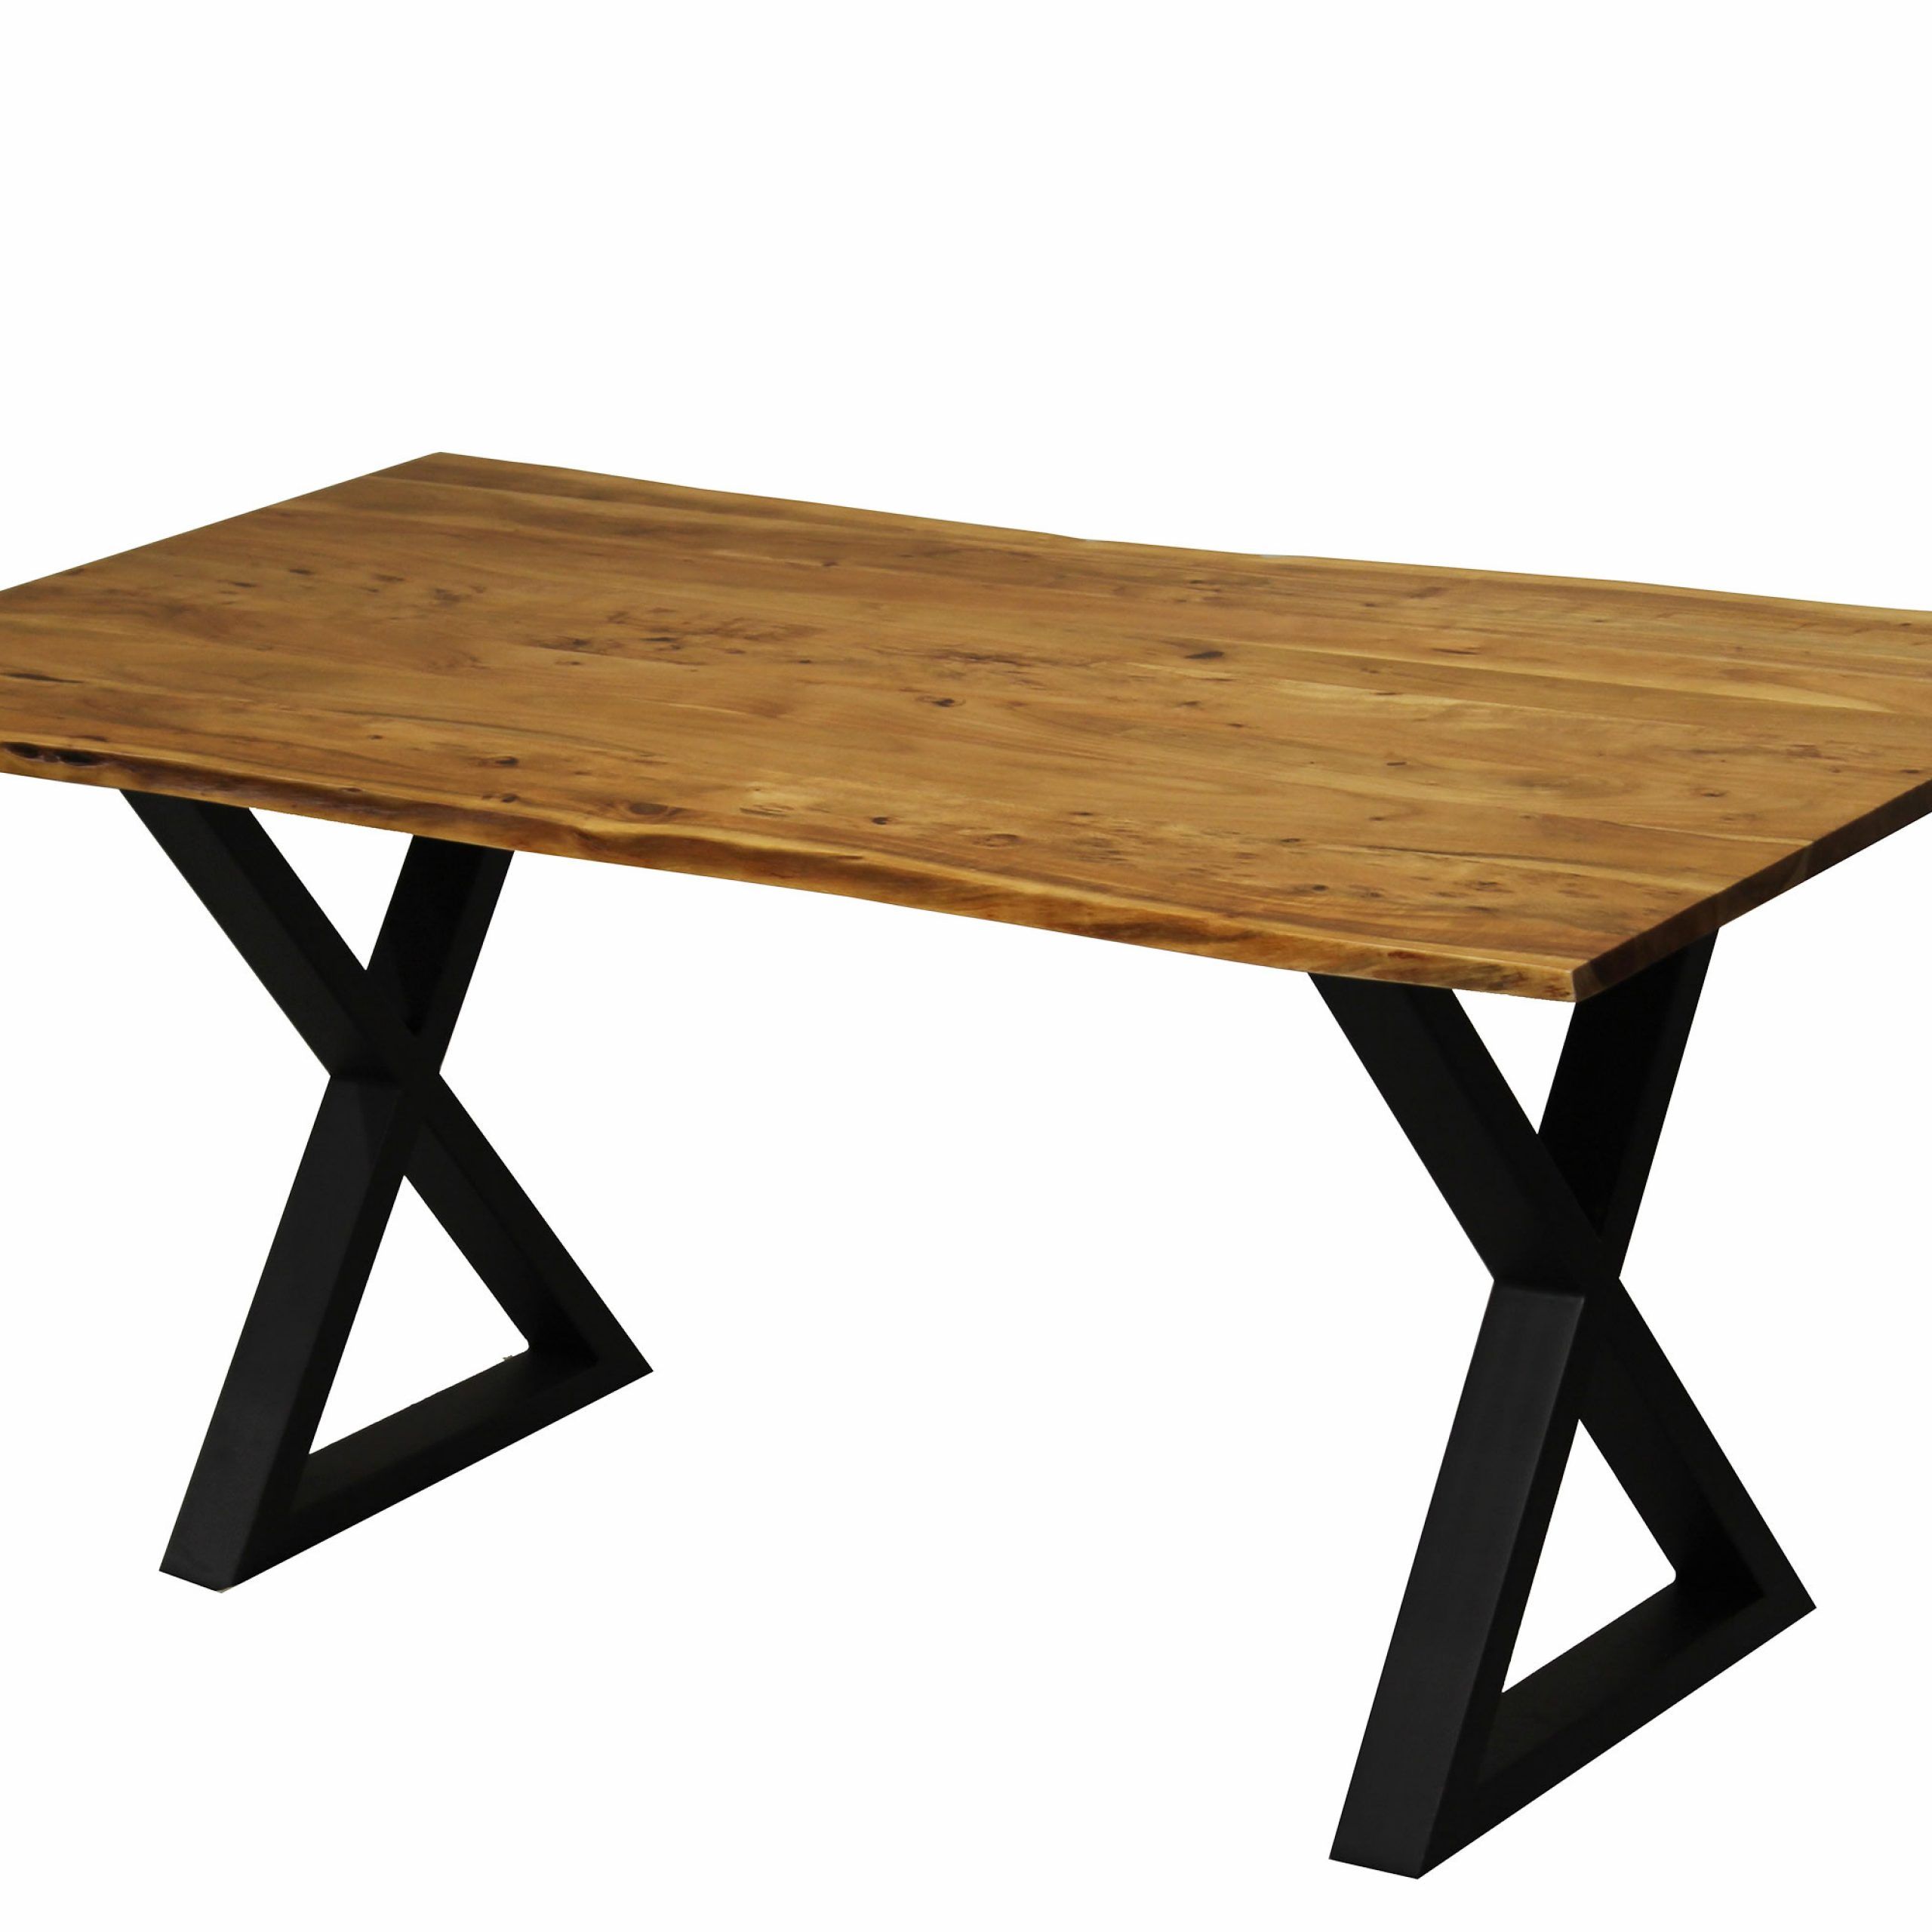 Acacia Dining Tables With Black Legs For Fashionable Zen Live Edge 67 Inches Dining Table (acacia – Black X Legs) (View 8 of 25)